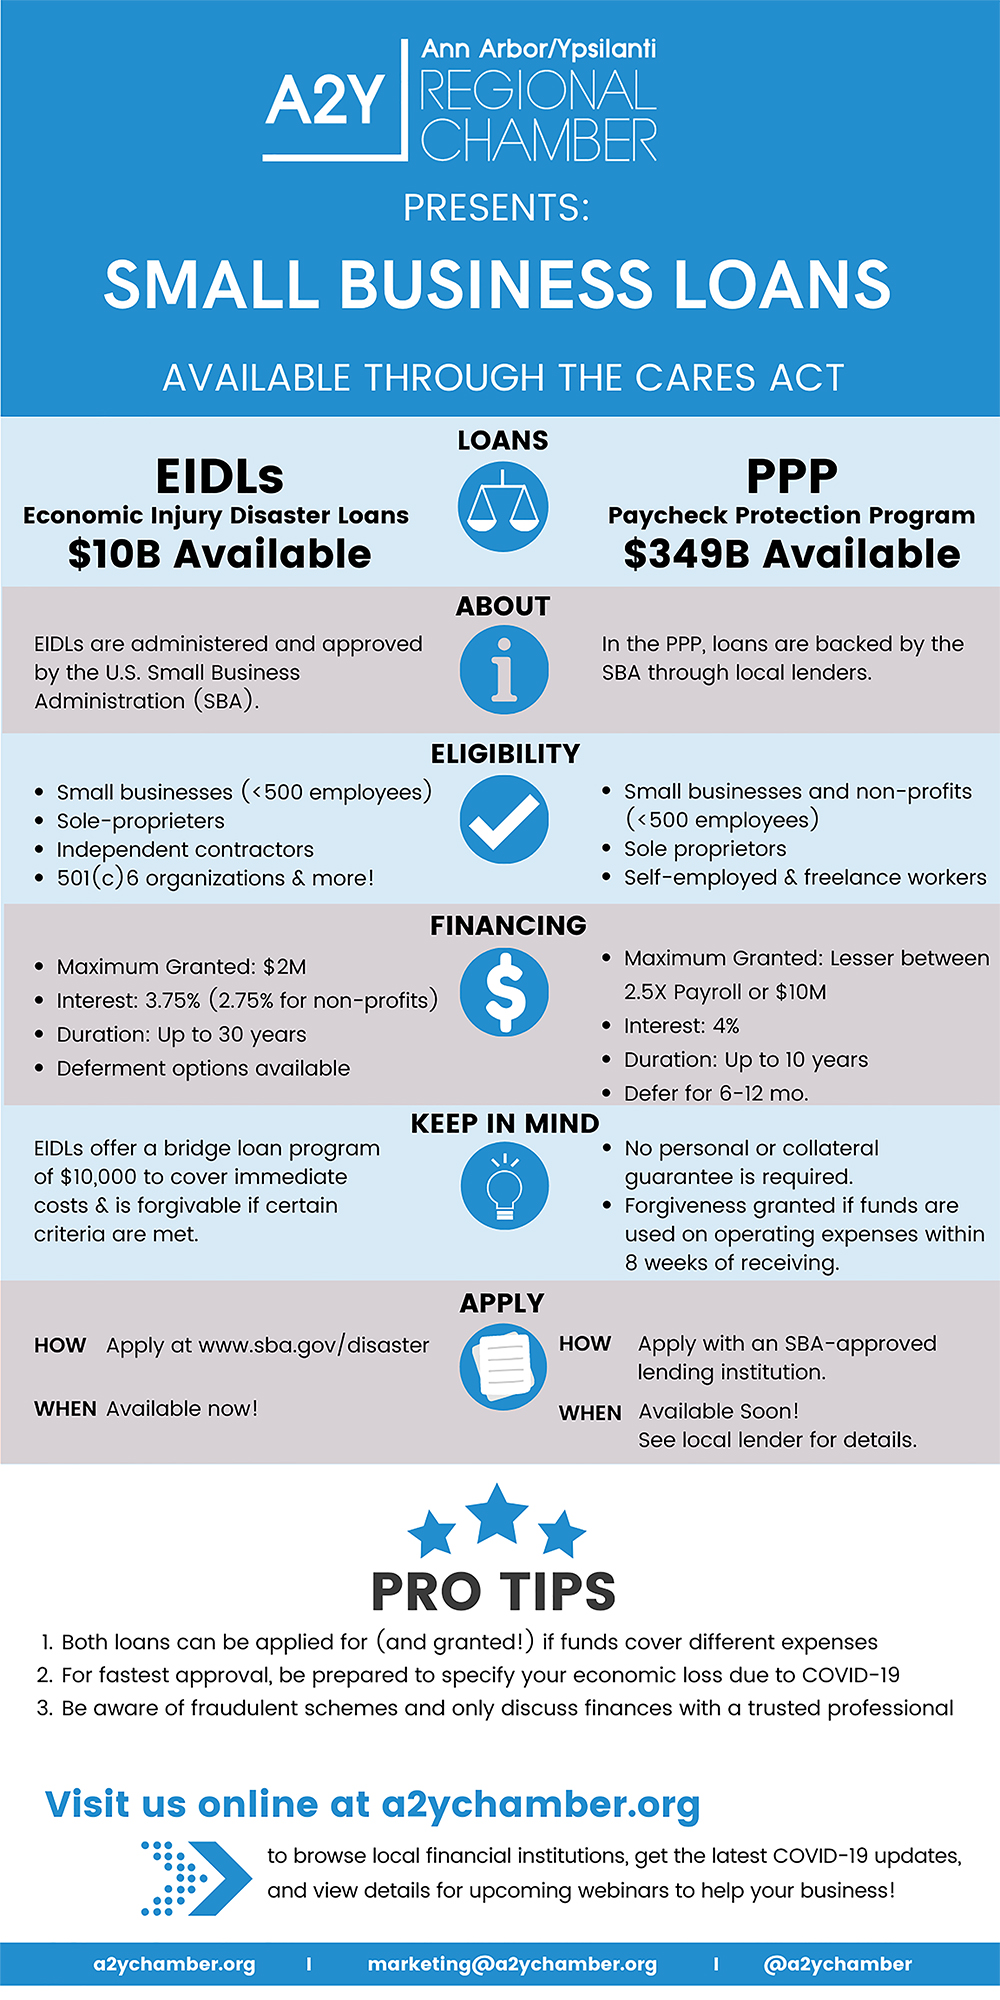 A2Y-Chamber-2020-COVID-19-Small-Business-Loans-Infographic-1000w